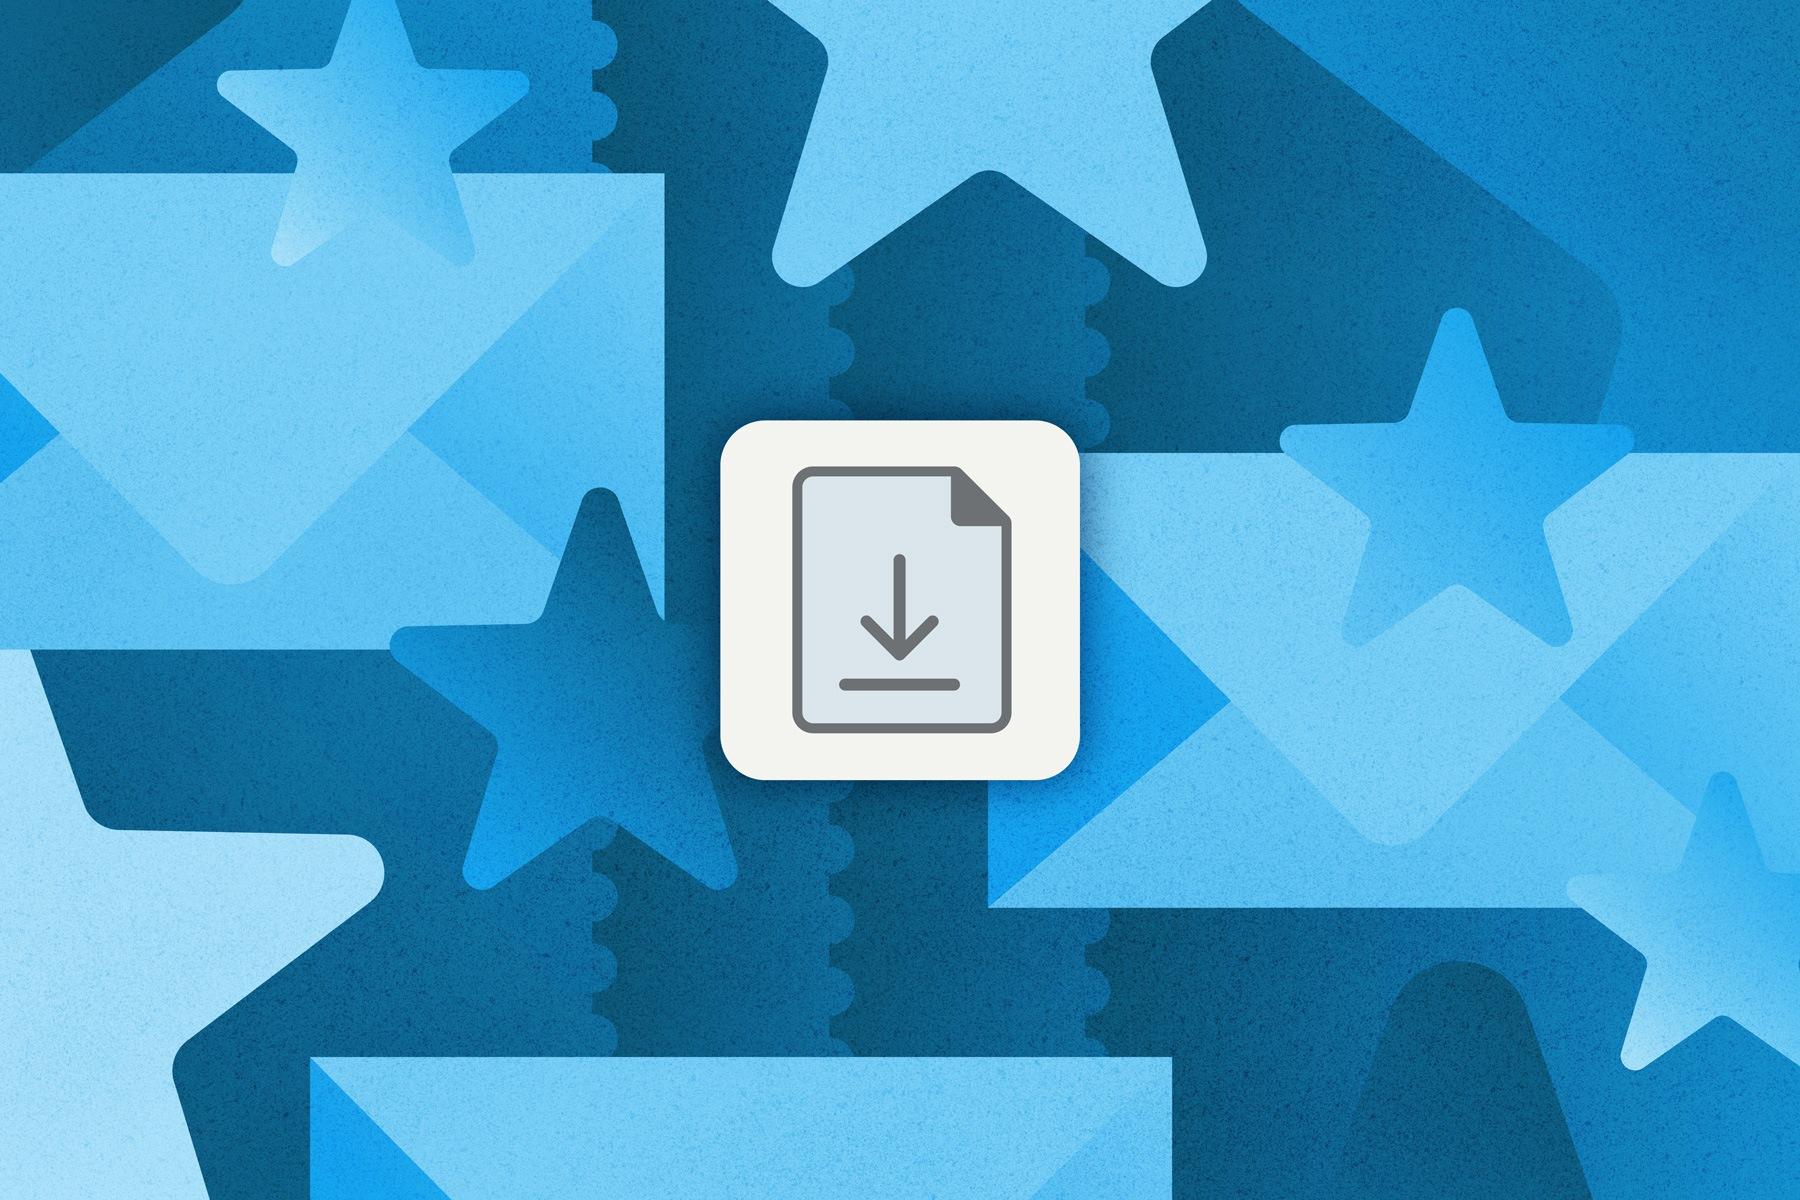 Illustrations of envelopes, stamps and stars, shaded in blue. A download icon hovers over the top.